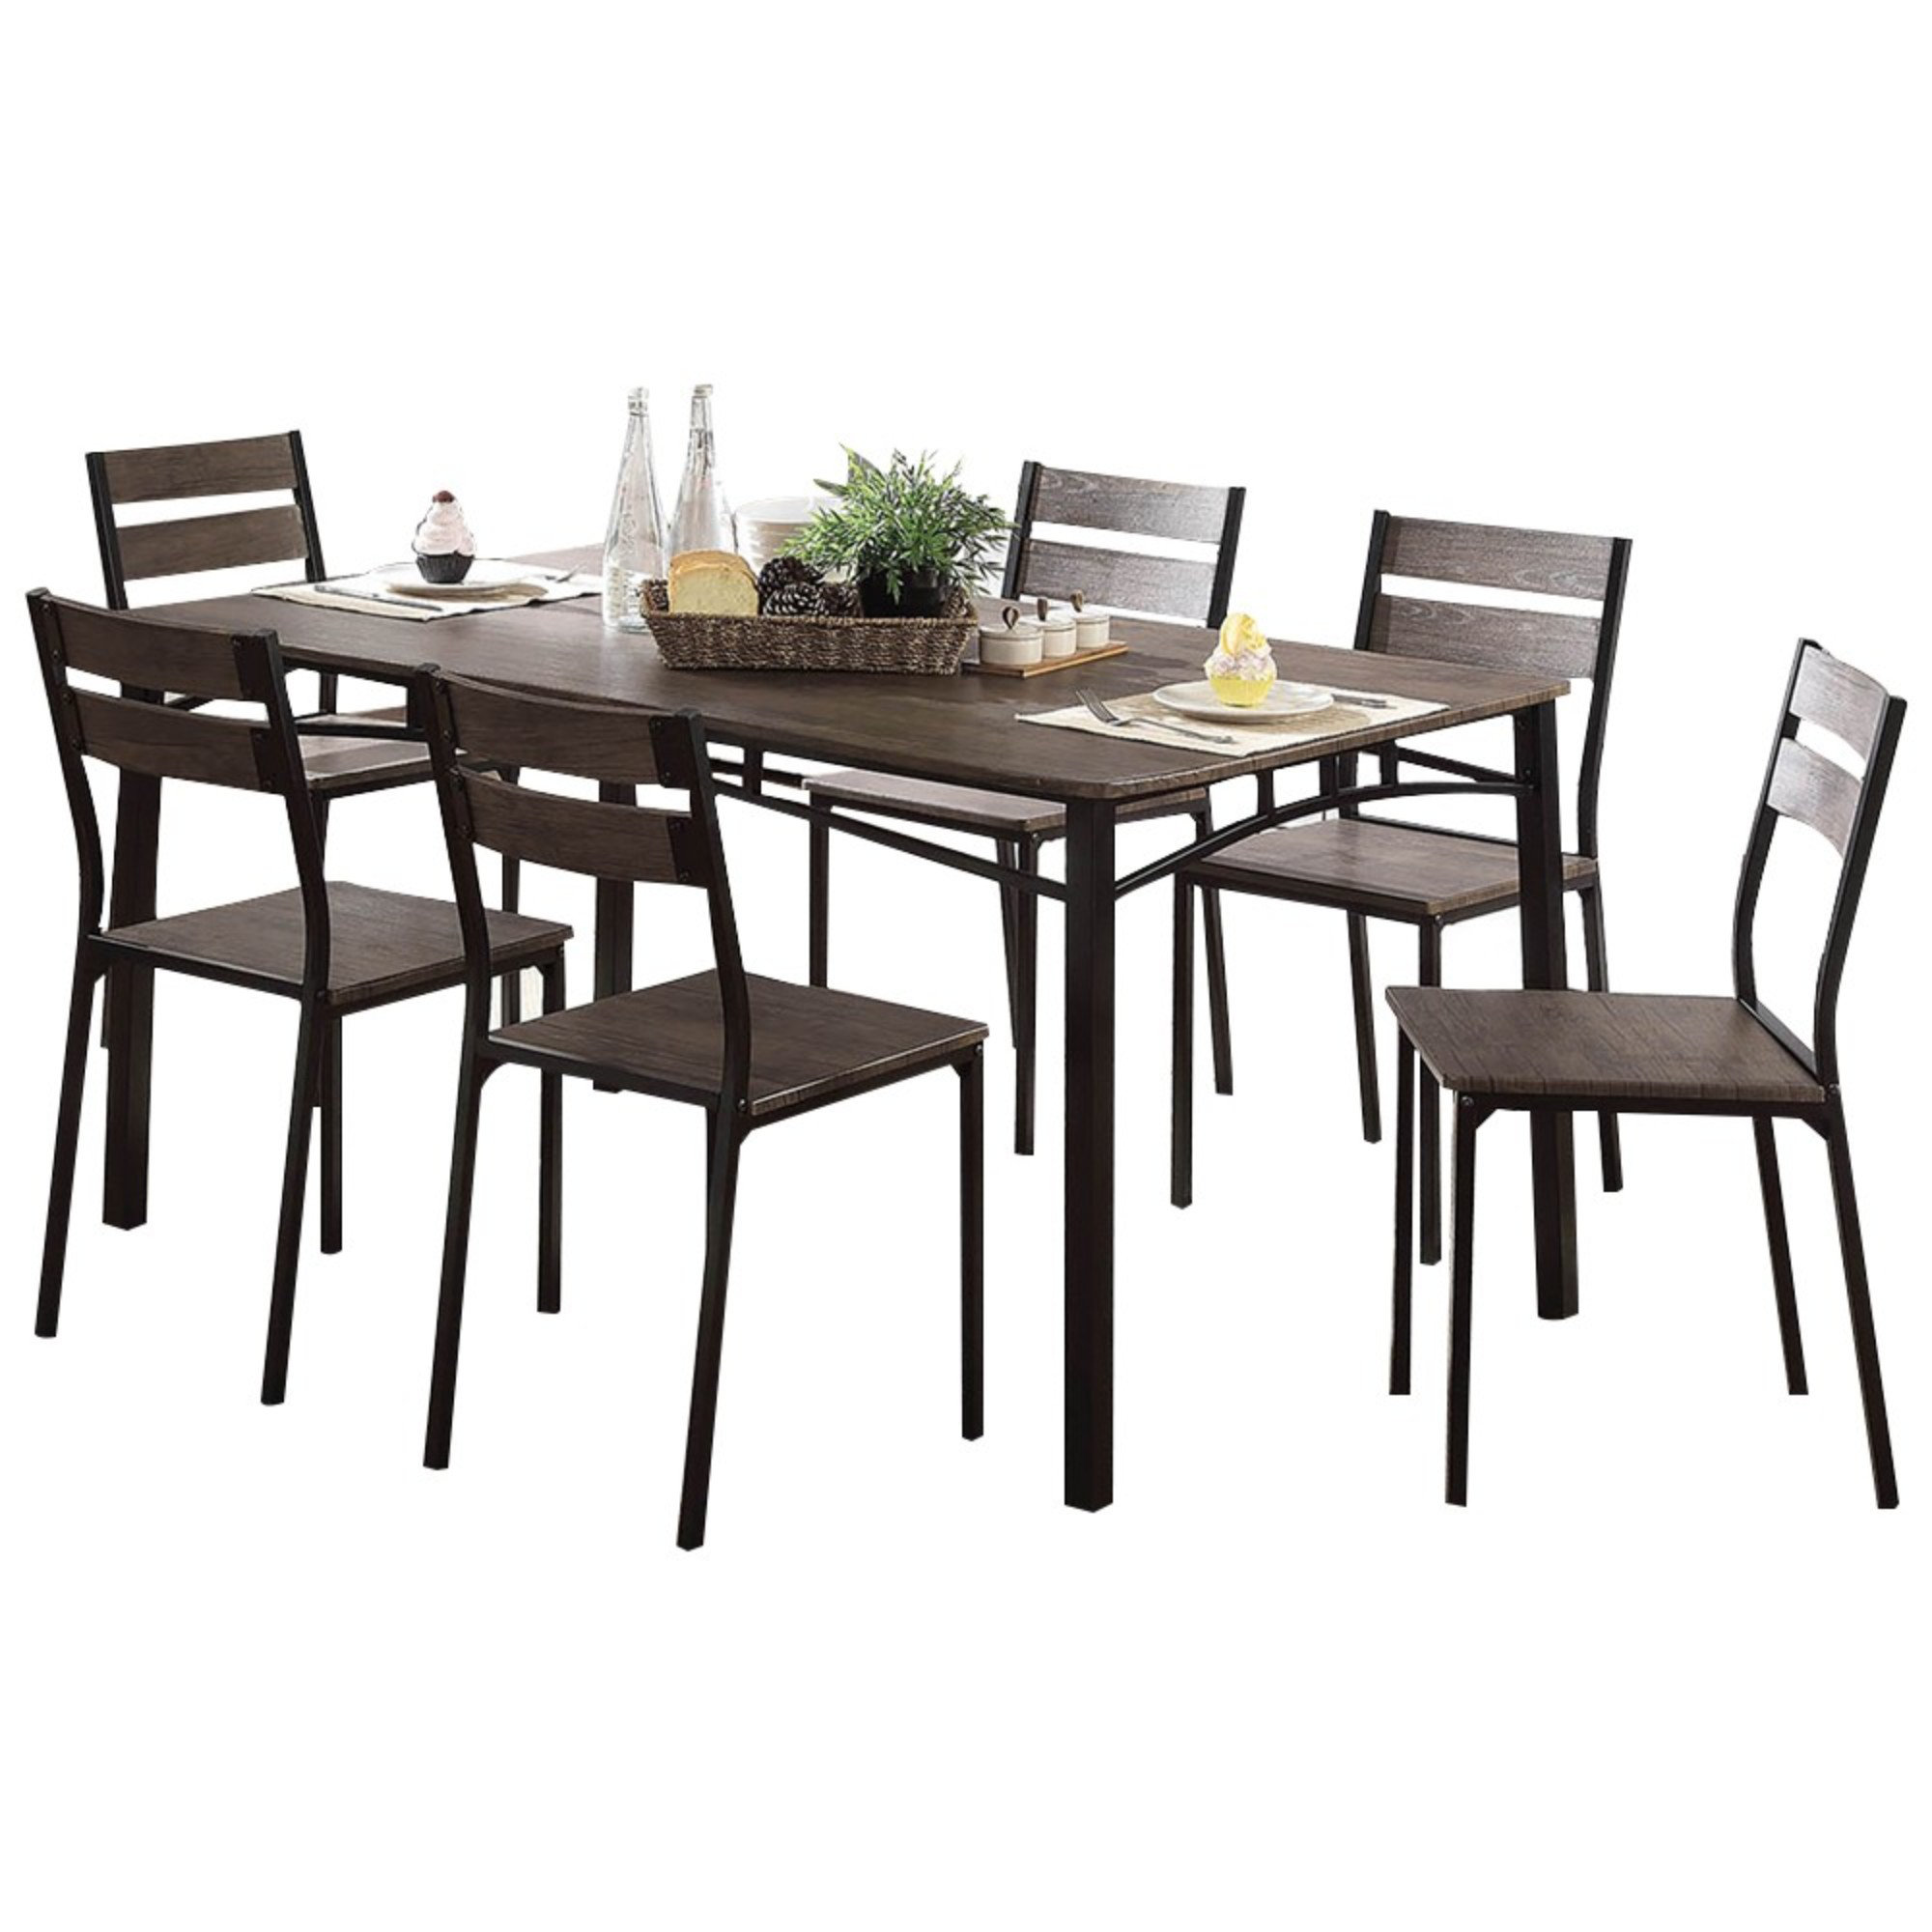 Brockway Wooden 7 Piece Counter Height Dining Table Set